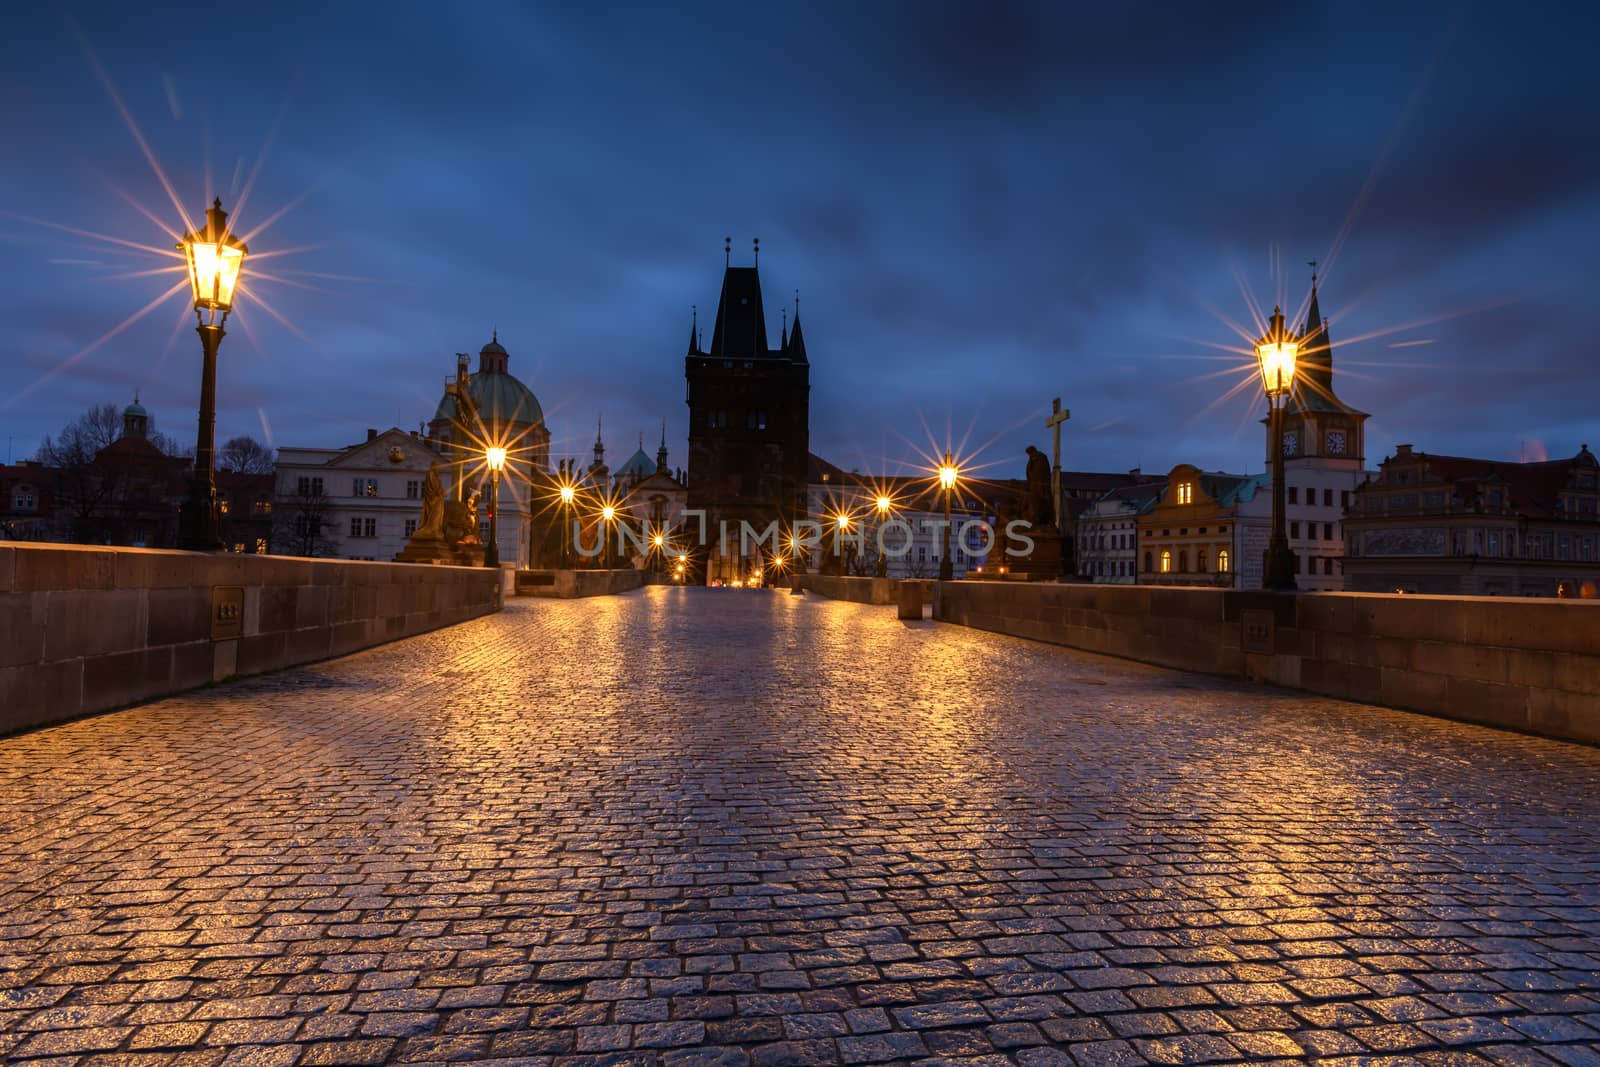 Historic bridge in Prague at sunrise with lights reflecting on the wet stone